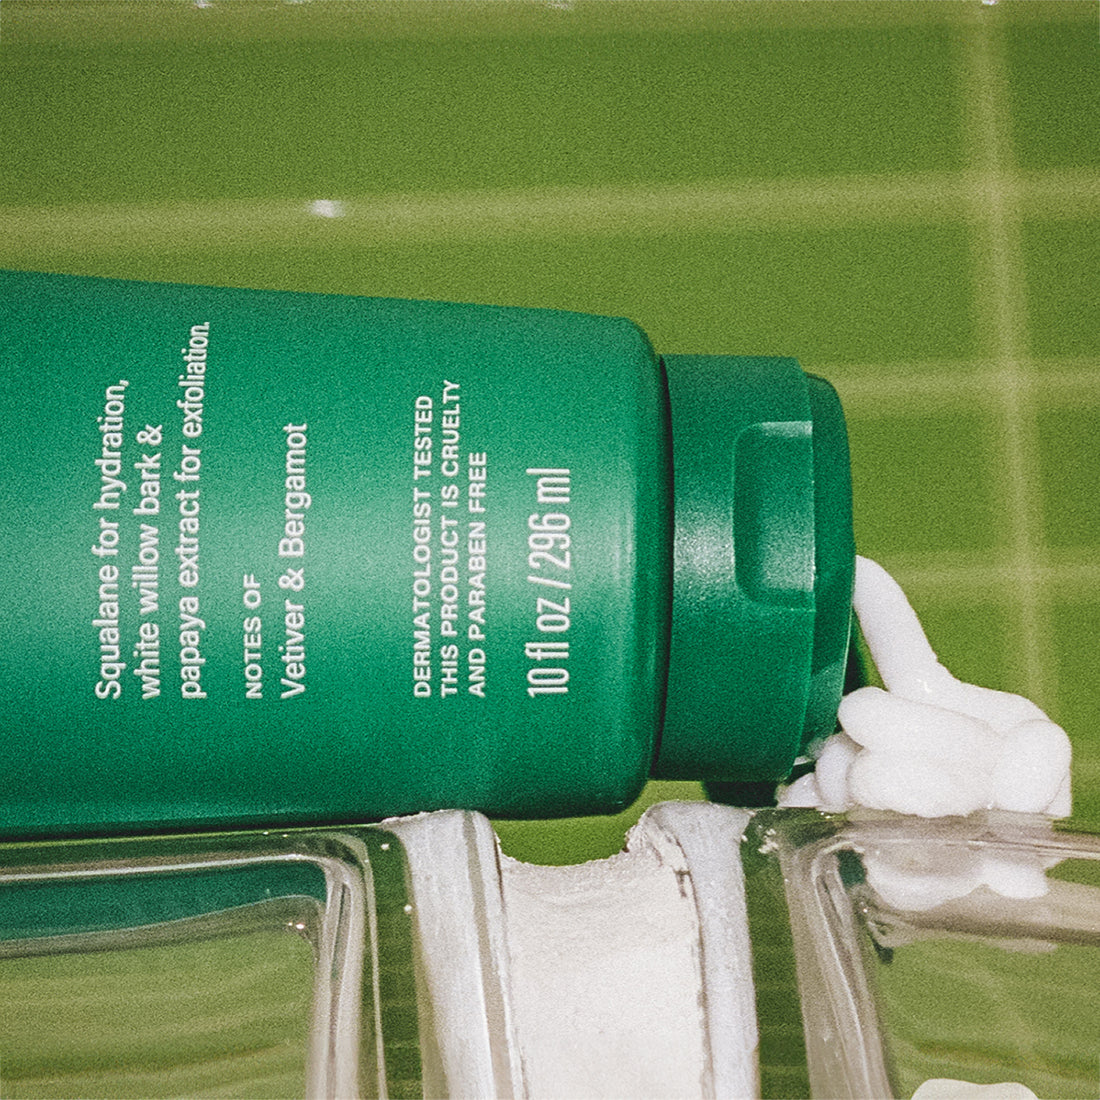 Open, green tube of Flamingo Daily Moisturizing Lotion in a bright green tiled bathroom